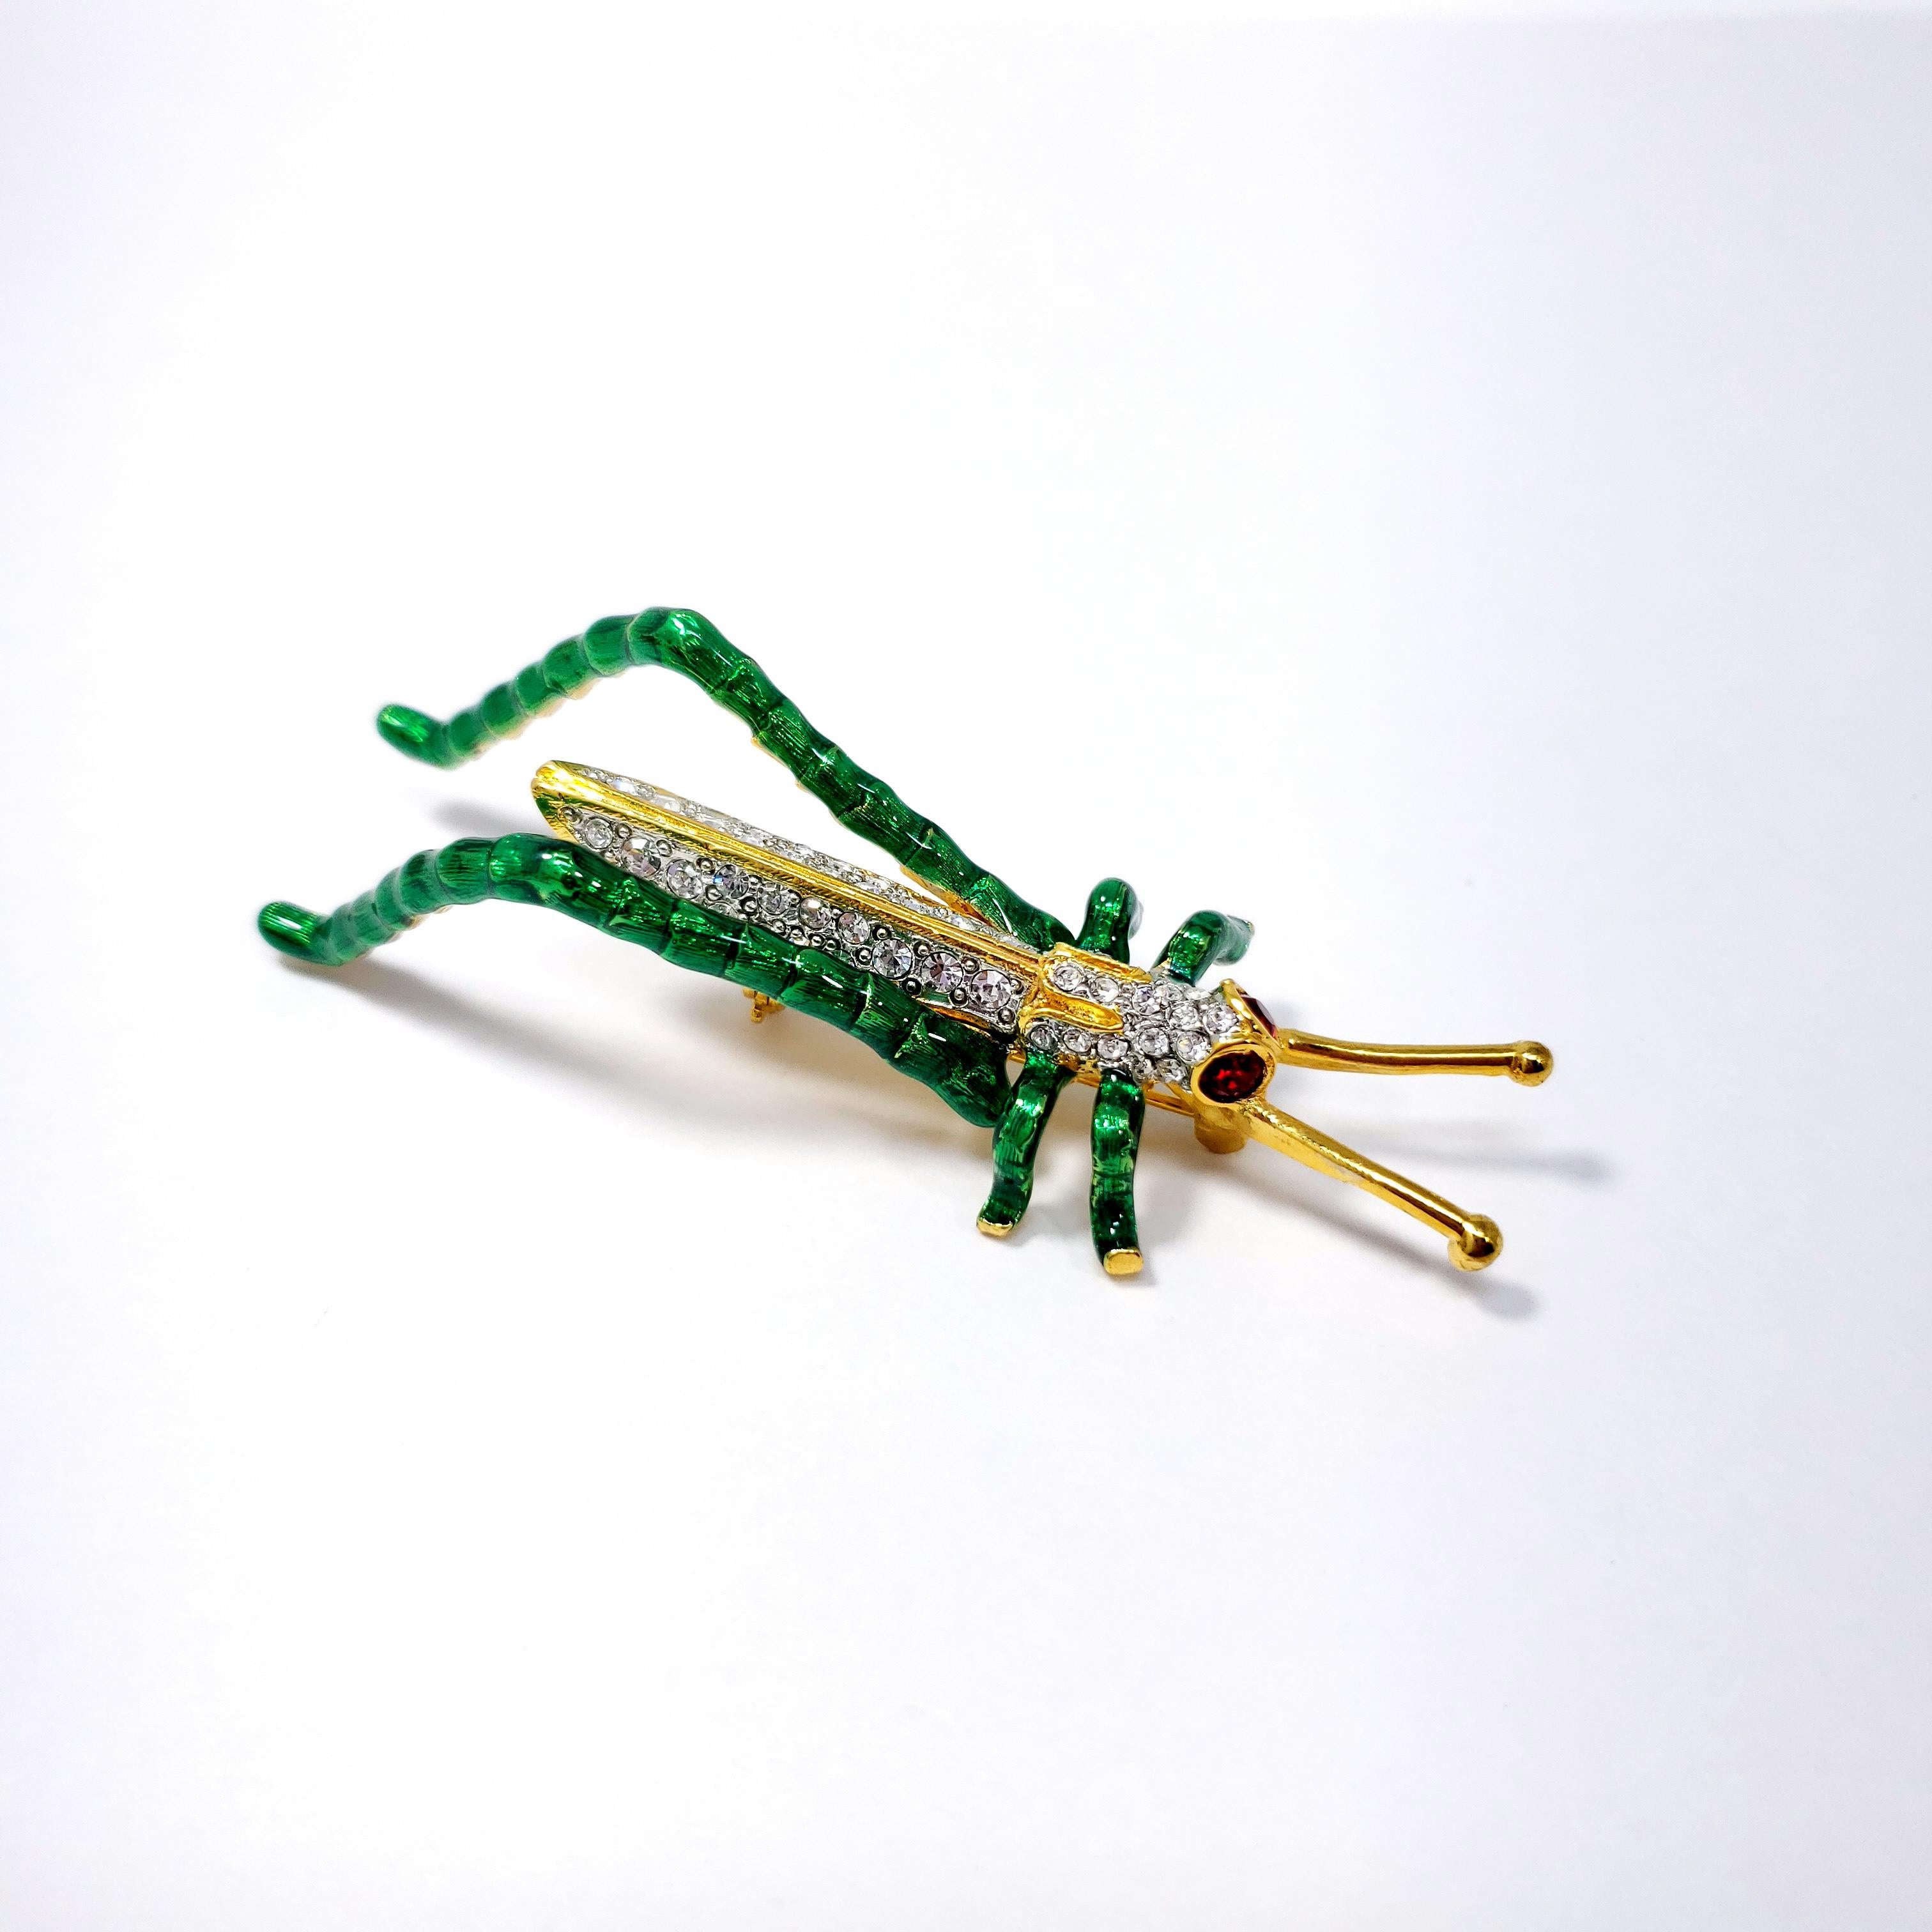 Clear and ruby crystals decorate this whimsical grasshopper pin brooch by Kenneth Jay Lane.

Painted green enamel on gold plated metal.

Hallmarks: KJL